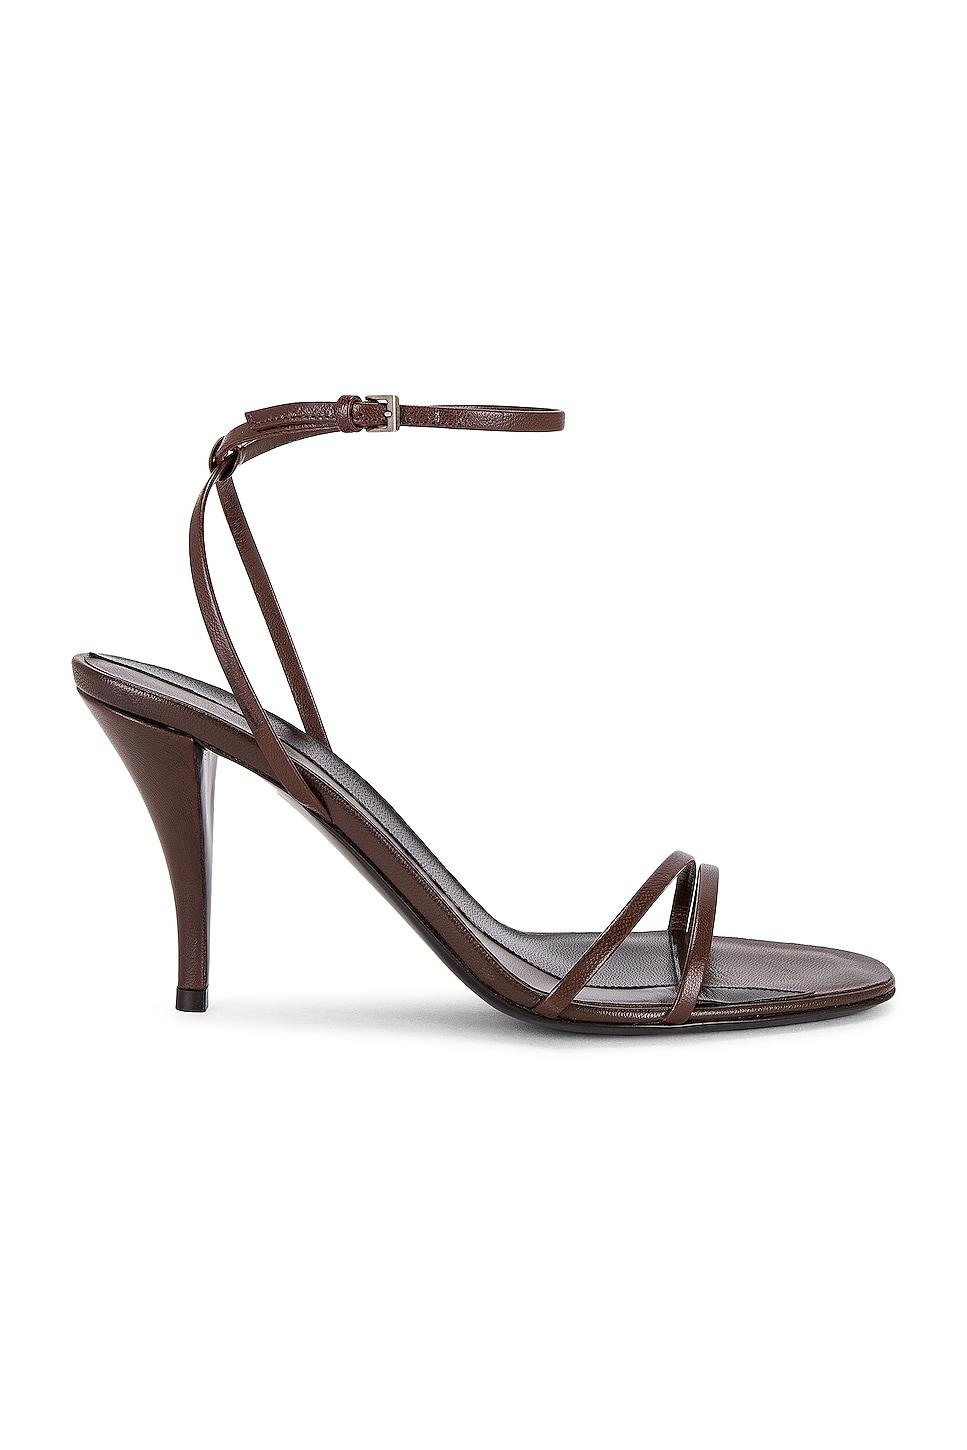 Image 1 of The Row Cleo Sandal in Hickory